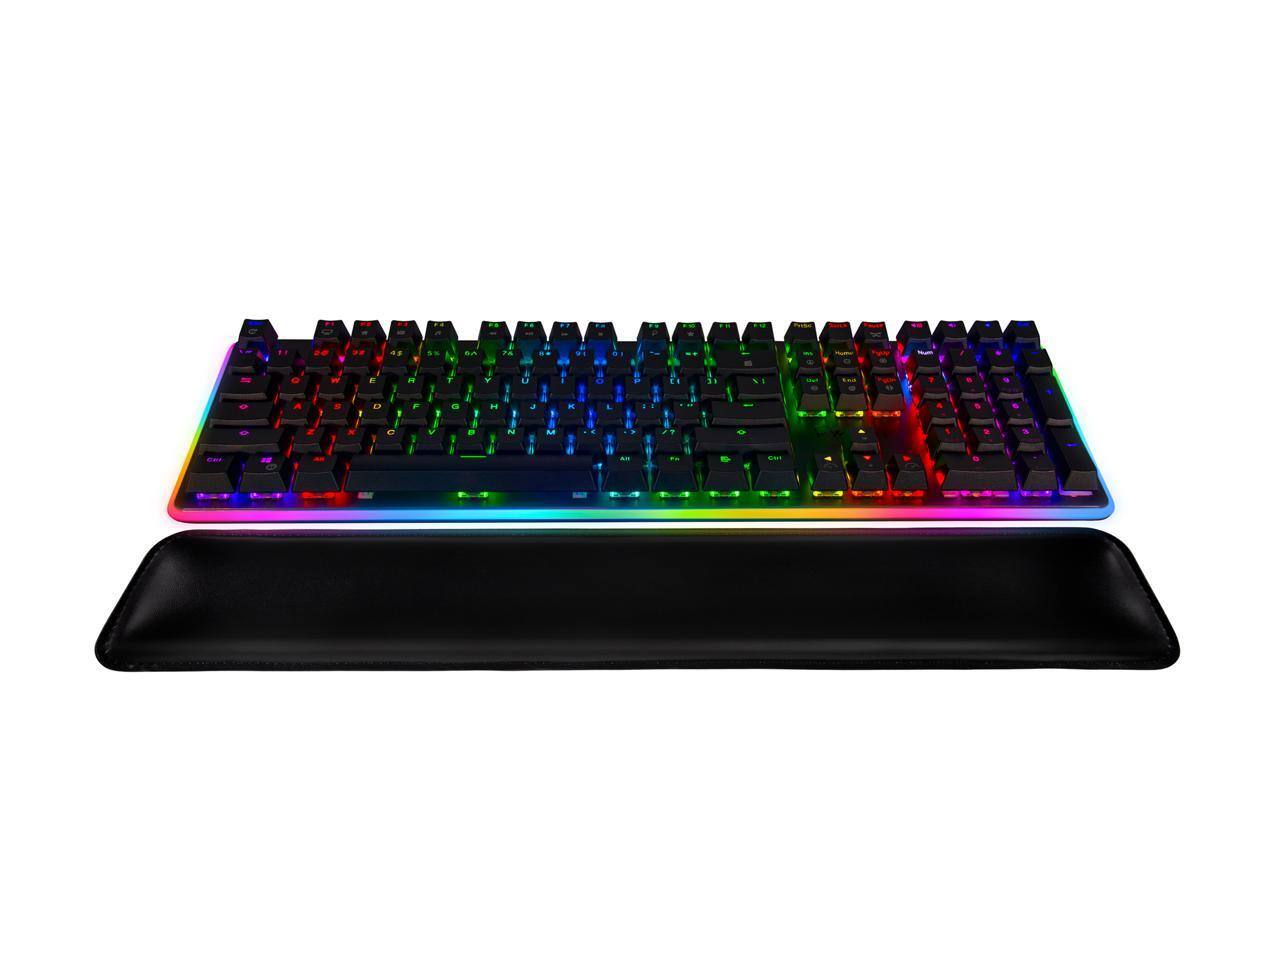 Rosewill Mechanical Gaming Keyboard, 22 RGB Backlit Modes, Brown Switches - NEON K81 BR for $49.99 +FS